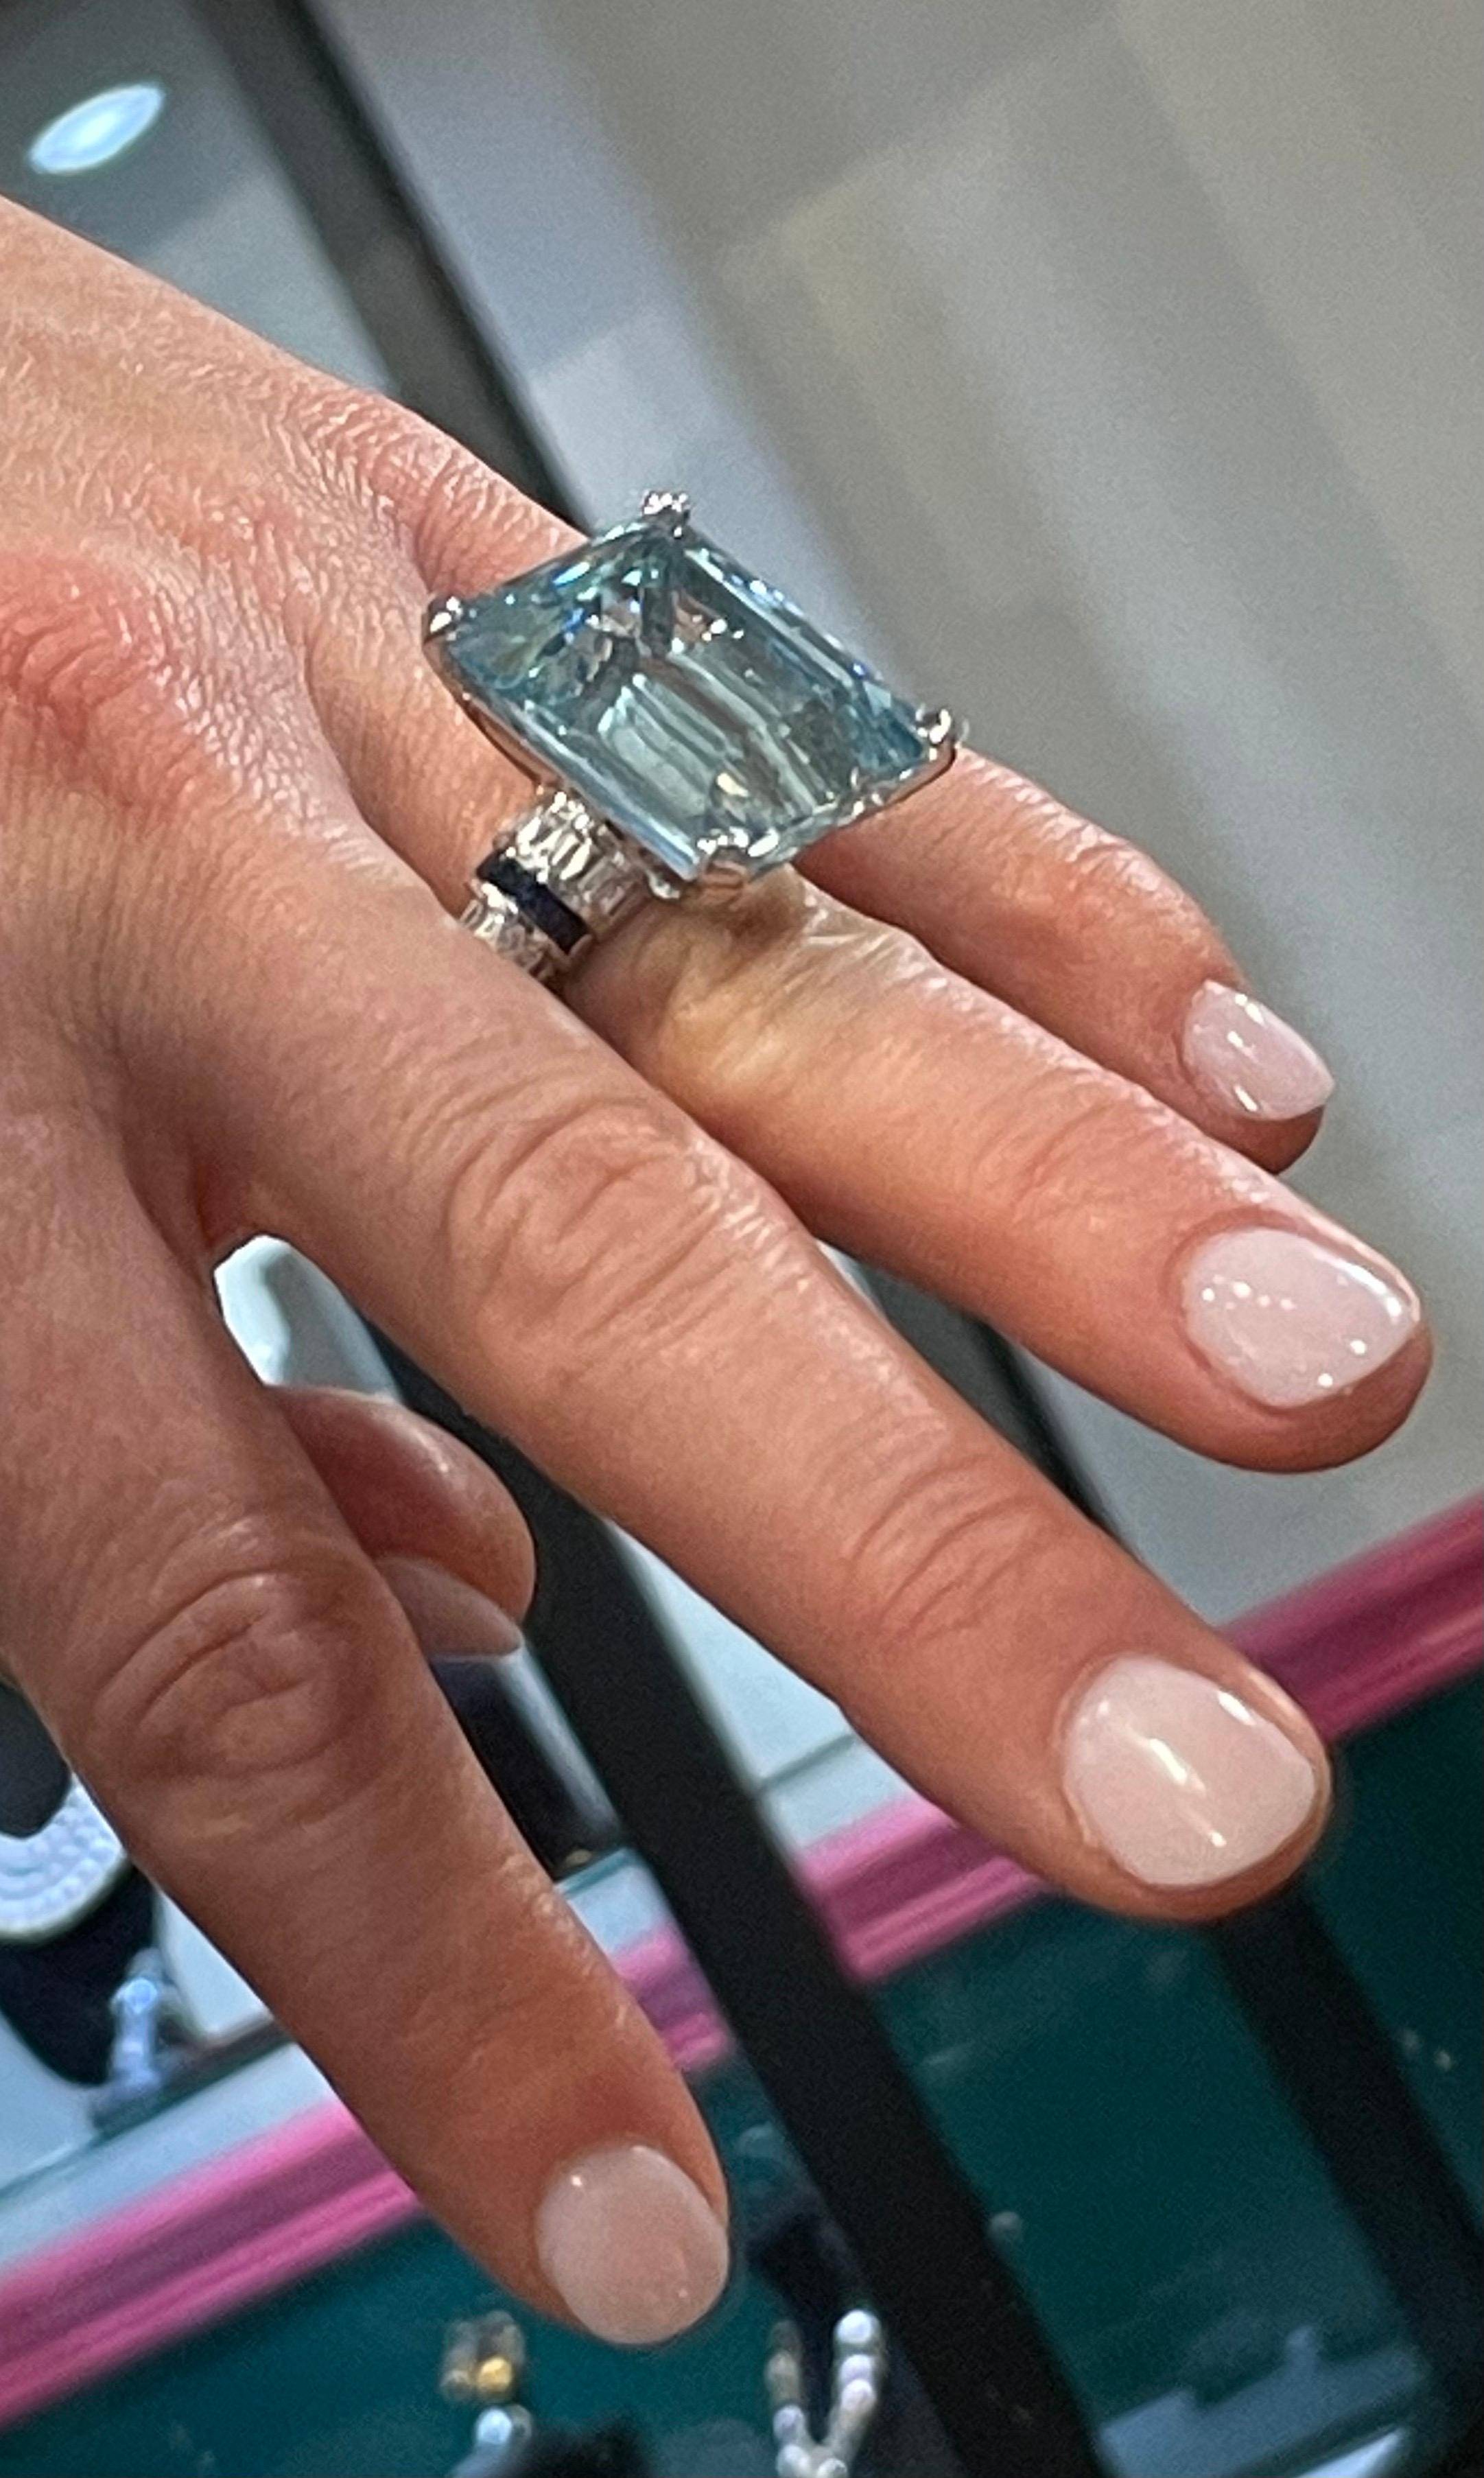 40.55ct emerald cut aquamarine accented with diamonds and sapphires set in 18kt white gold.
Incredible color and size.
Ring size 6